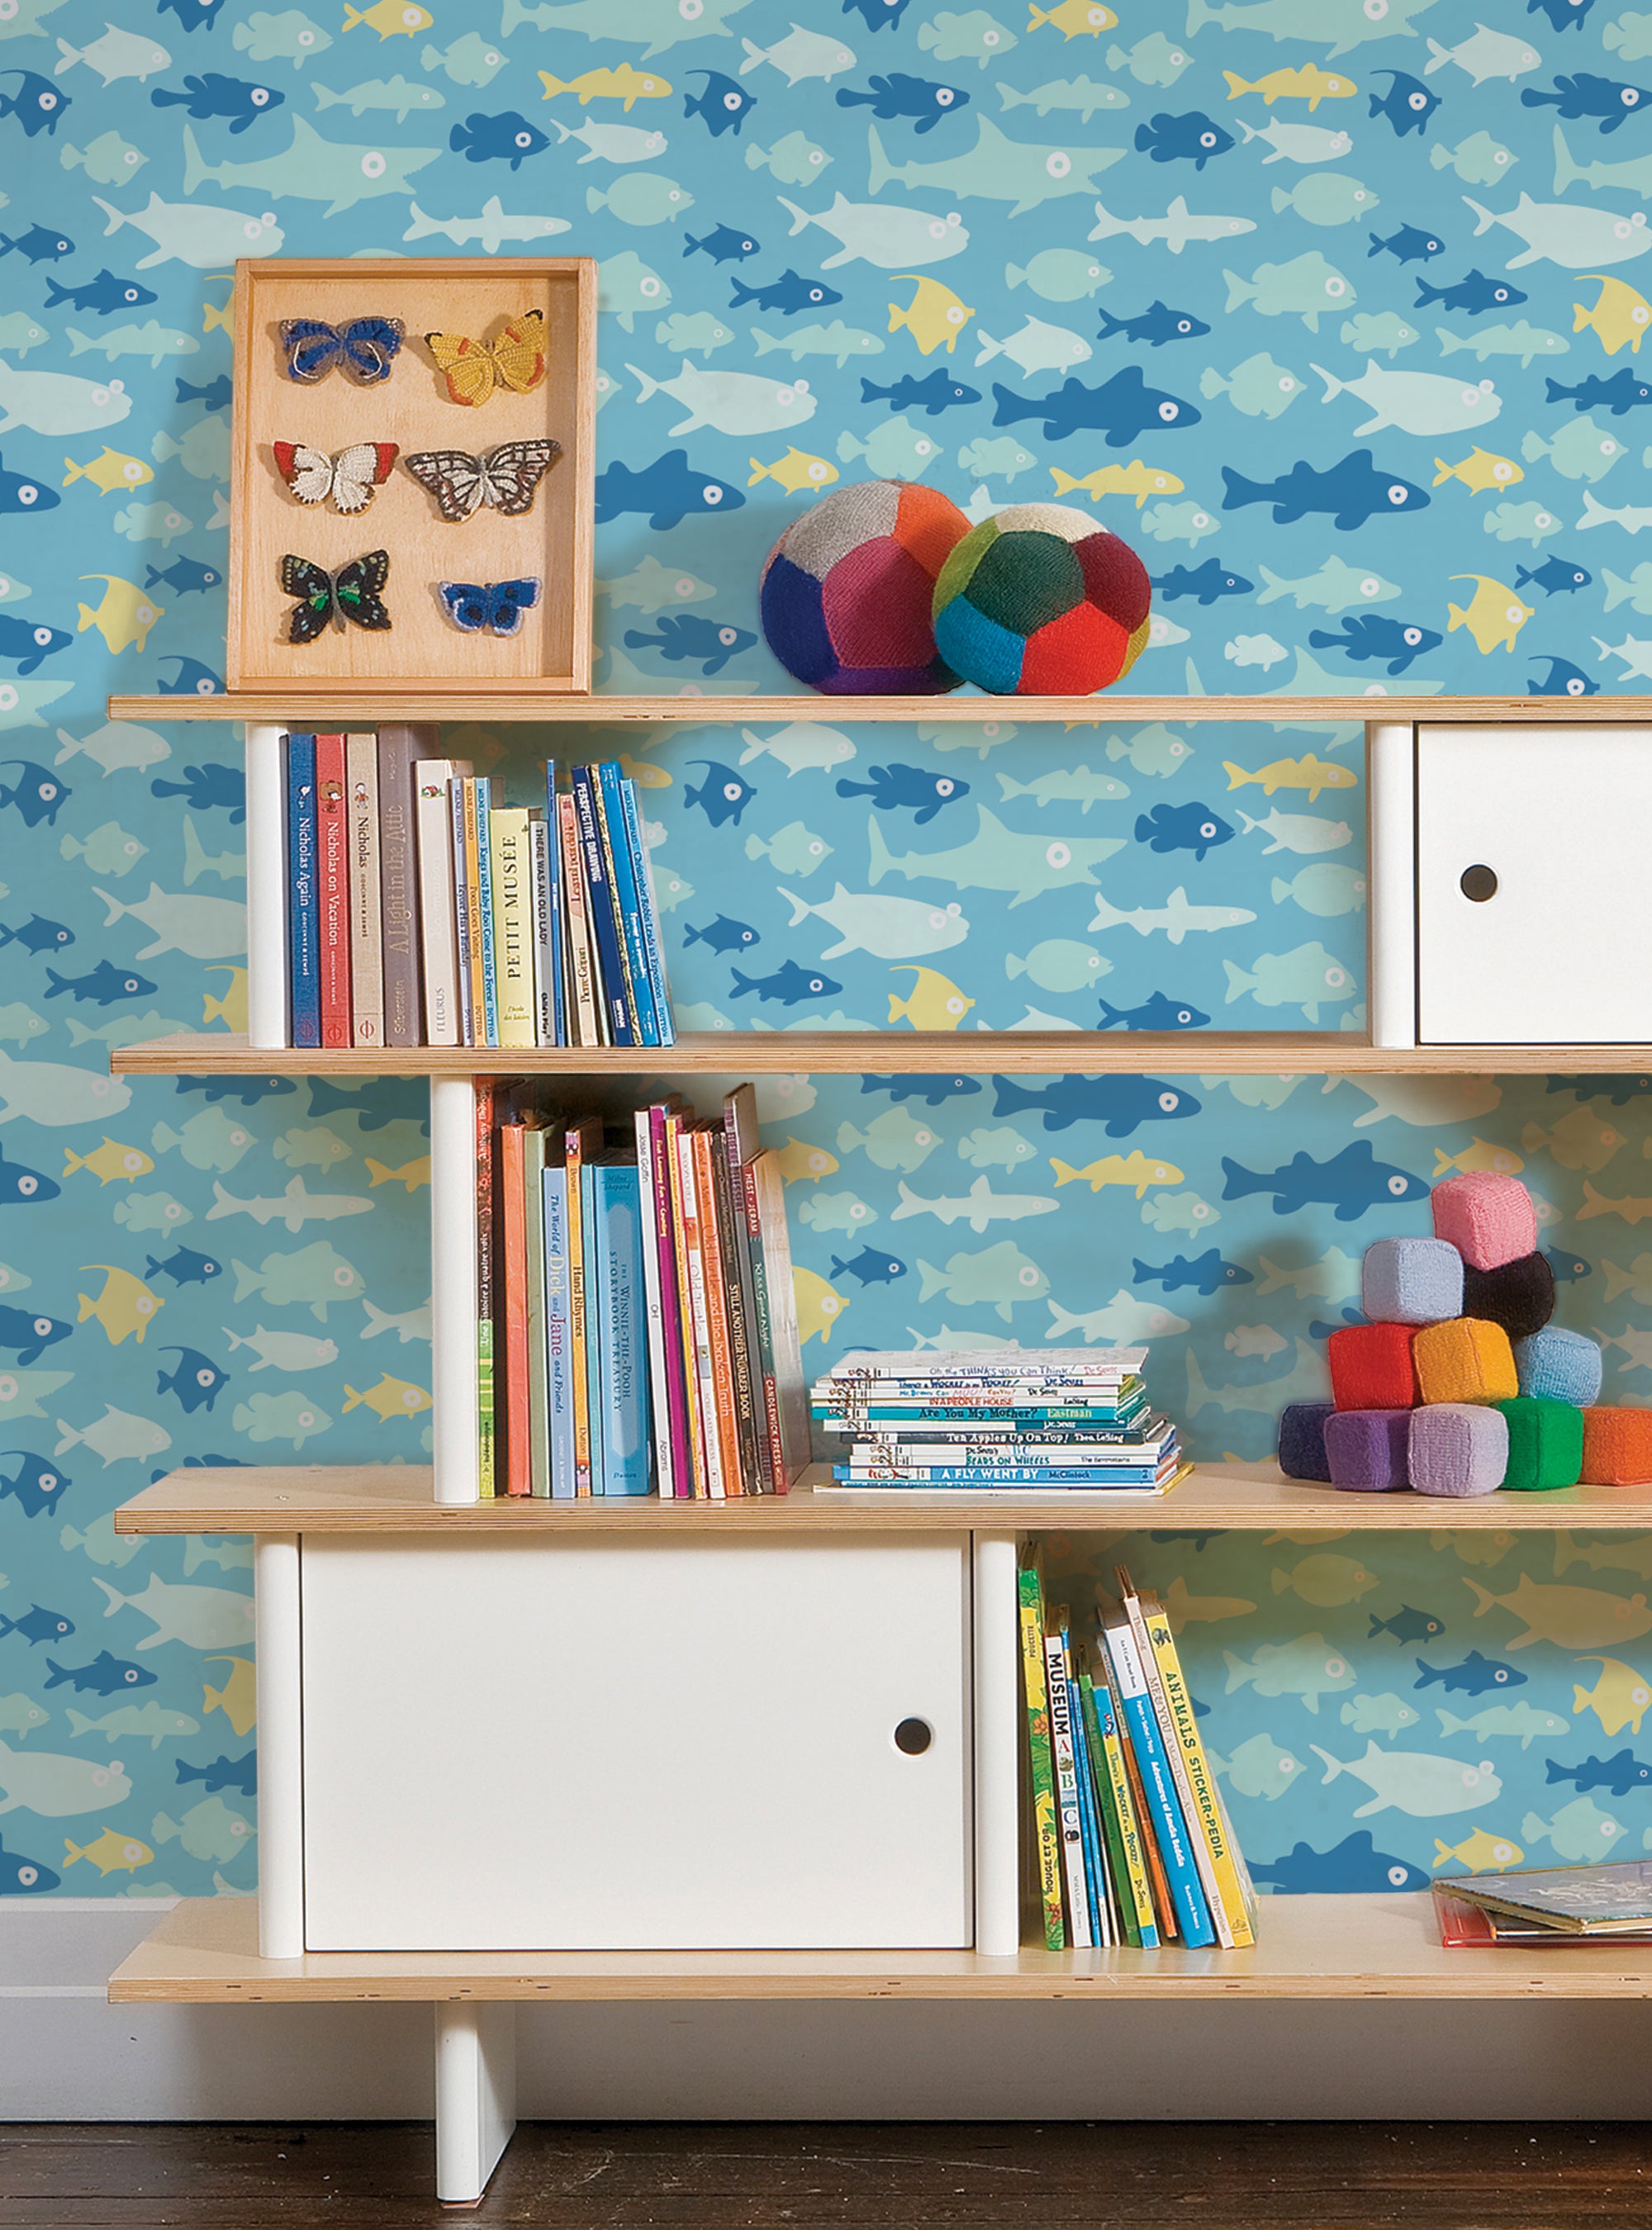 Fish Tank Wallpaper - Peel and Stick, Small Sample 8 x 11 Inches / Blue / Fabric Peel and Stick